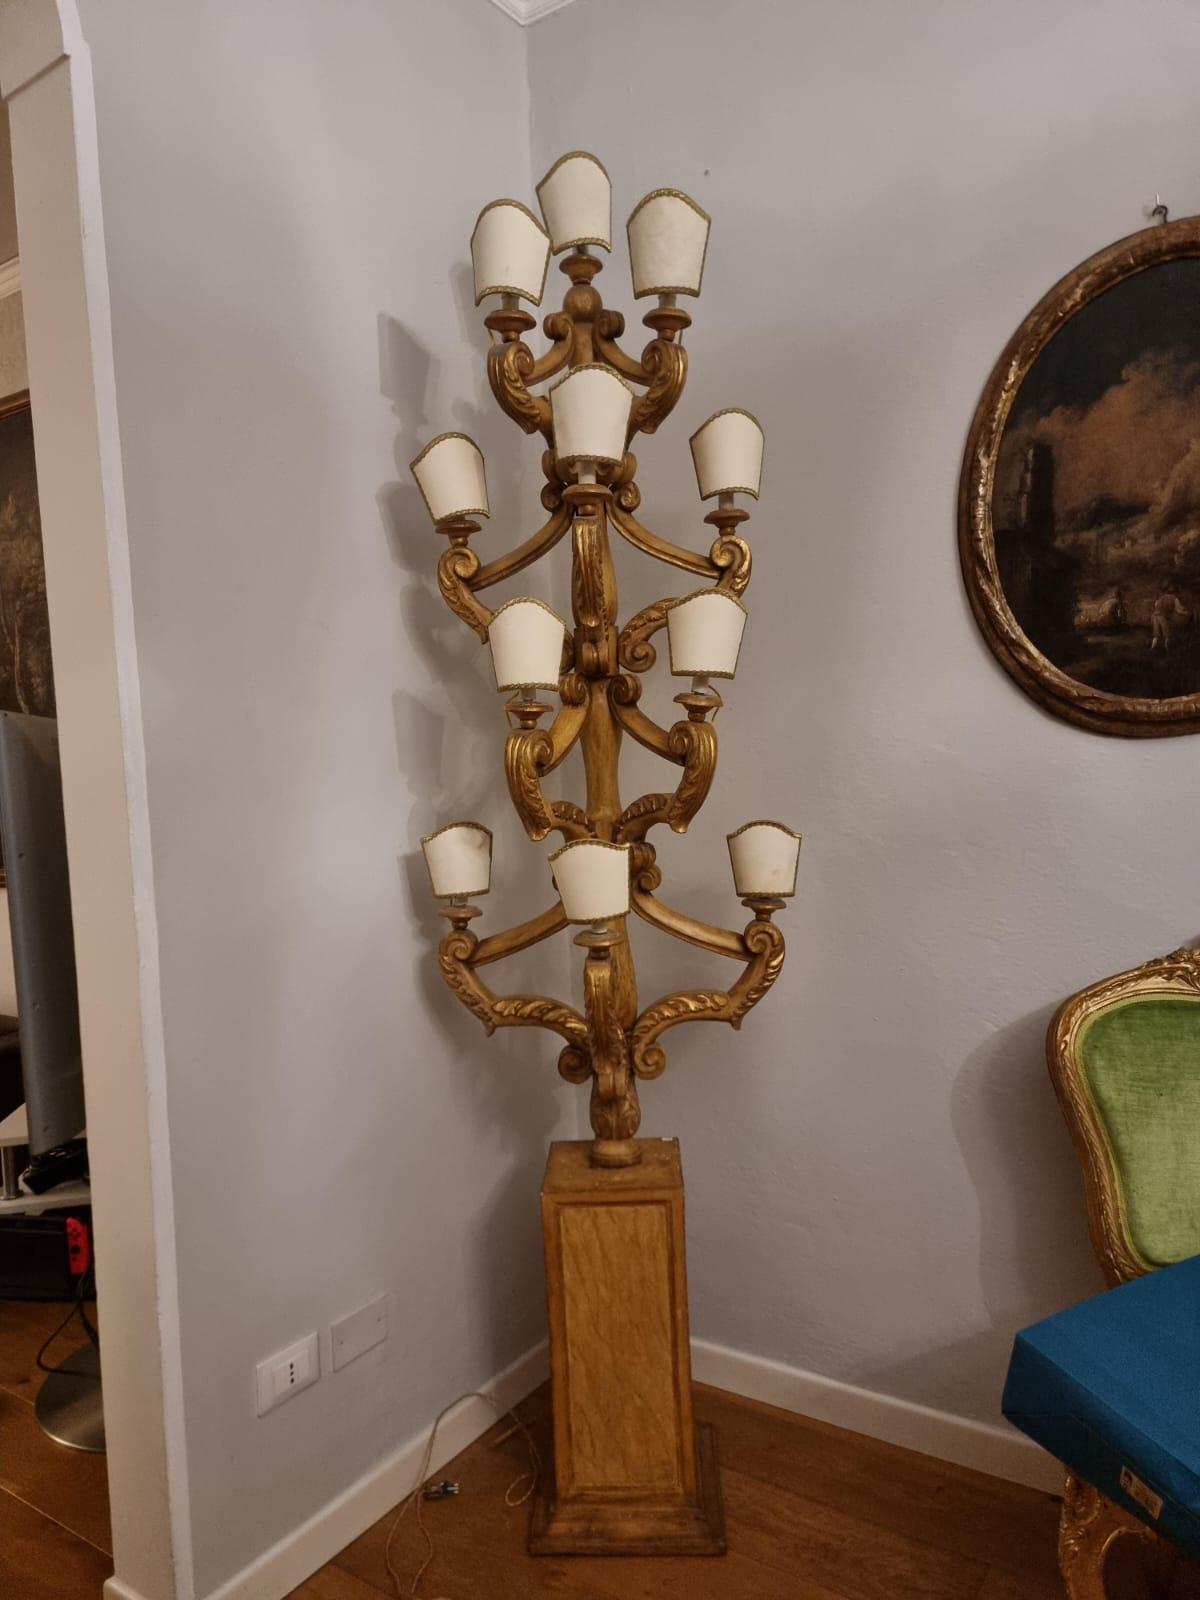 Pair of twelve-light candelabra in carved, lacquered and gilded wood, from central Italy and dating back to the 18th century.

The use of carved wood is common in 18th-century furniture and objets d'art. The carvings allow you to create complex